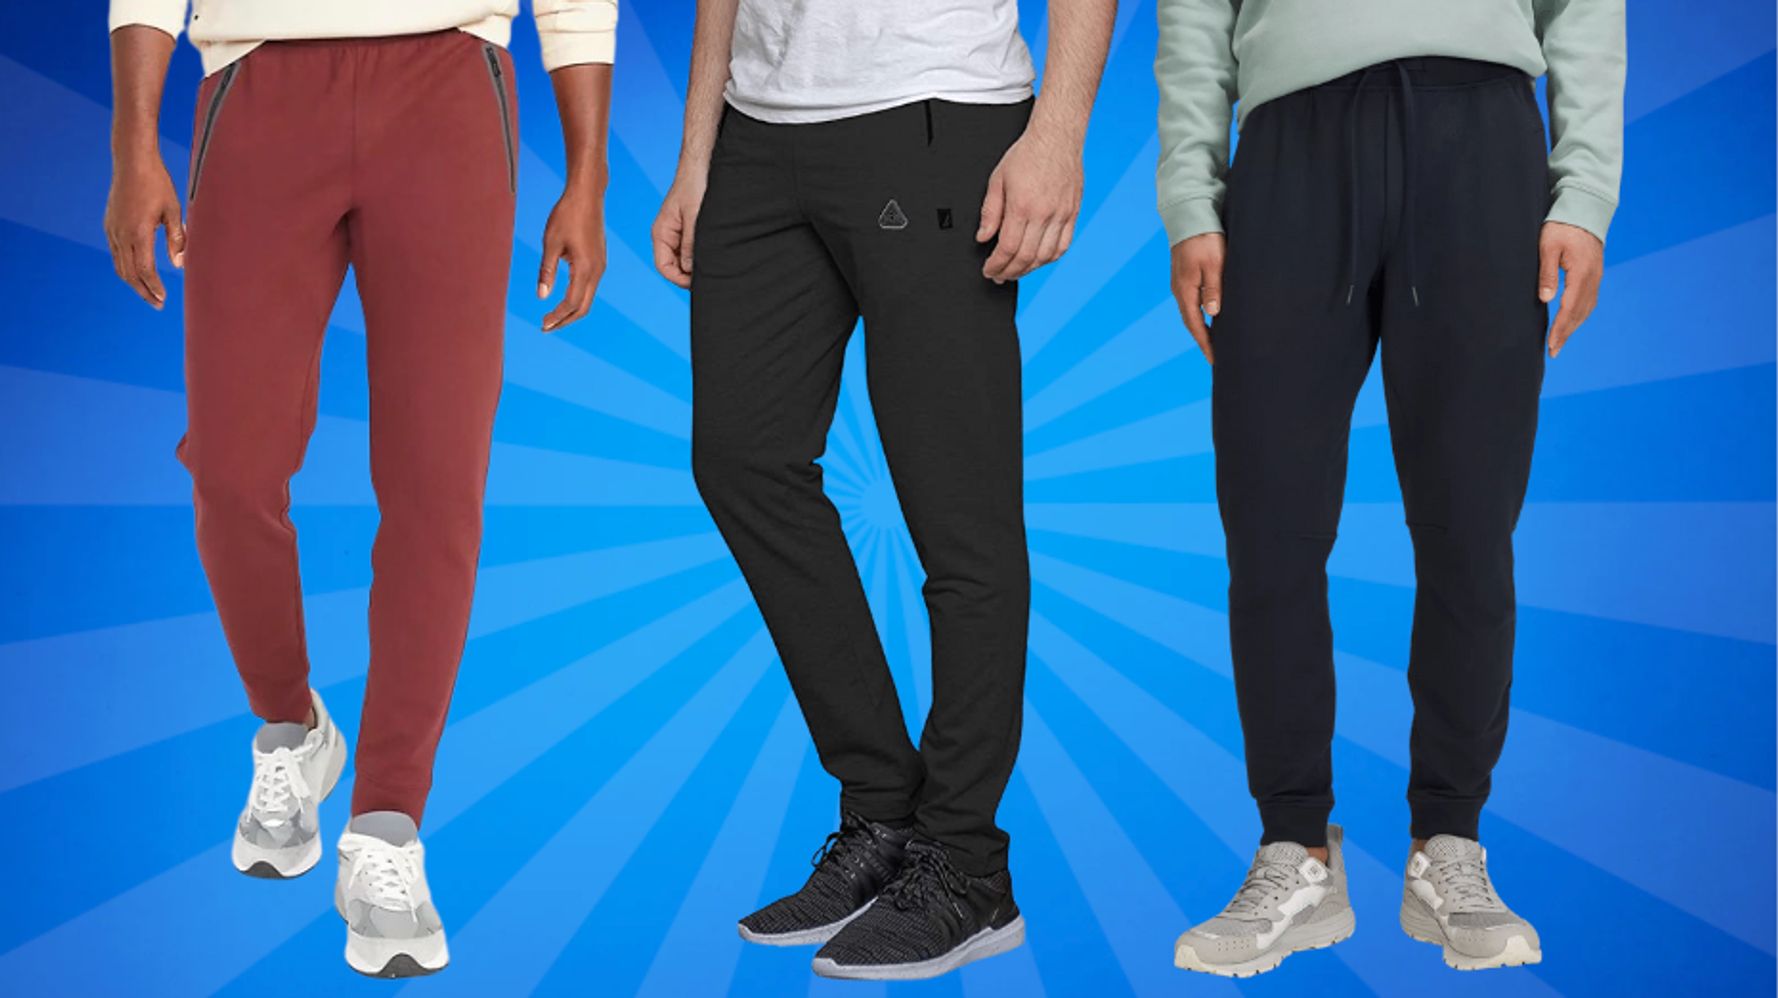 41 Best Sweatpants For Men To Wear In 2023, According To Style Experts ...